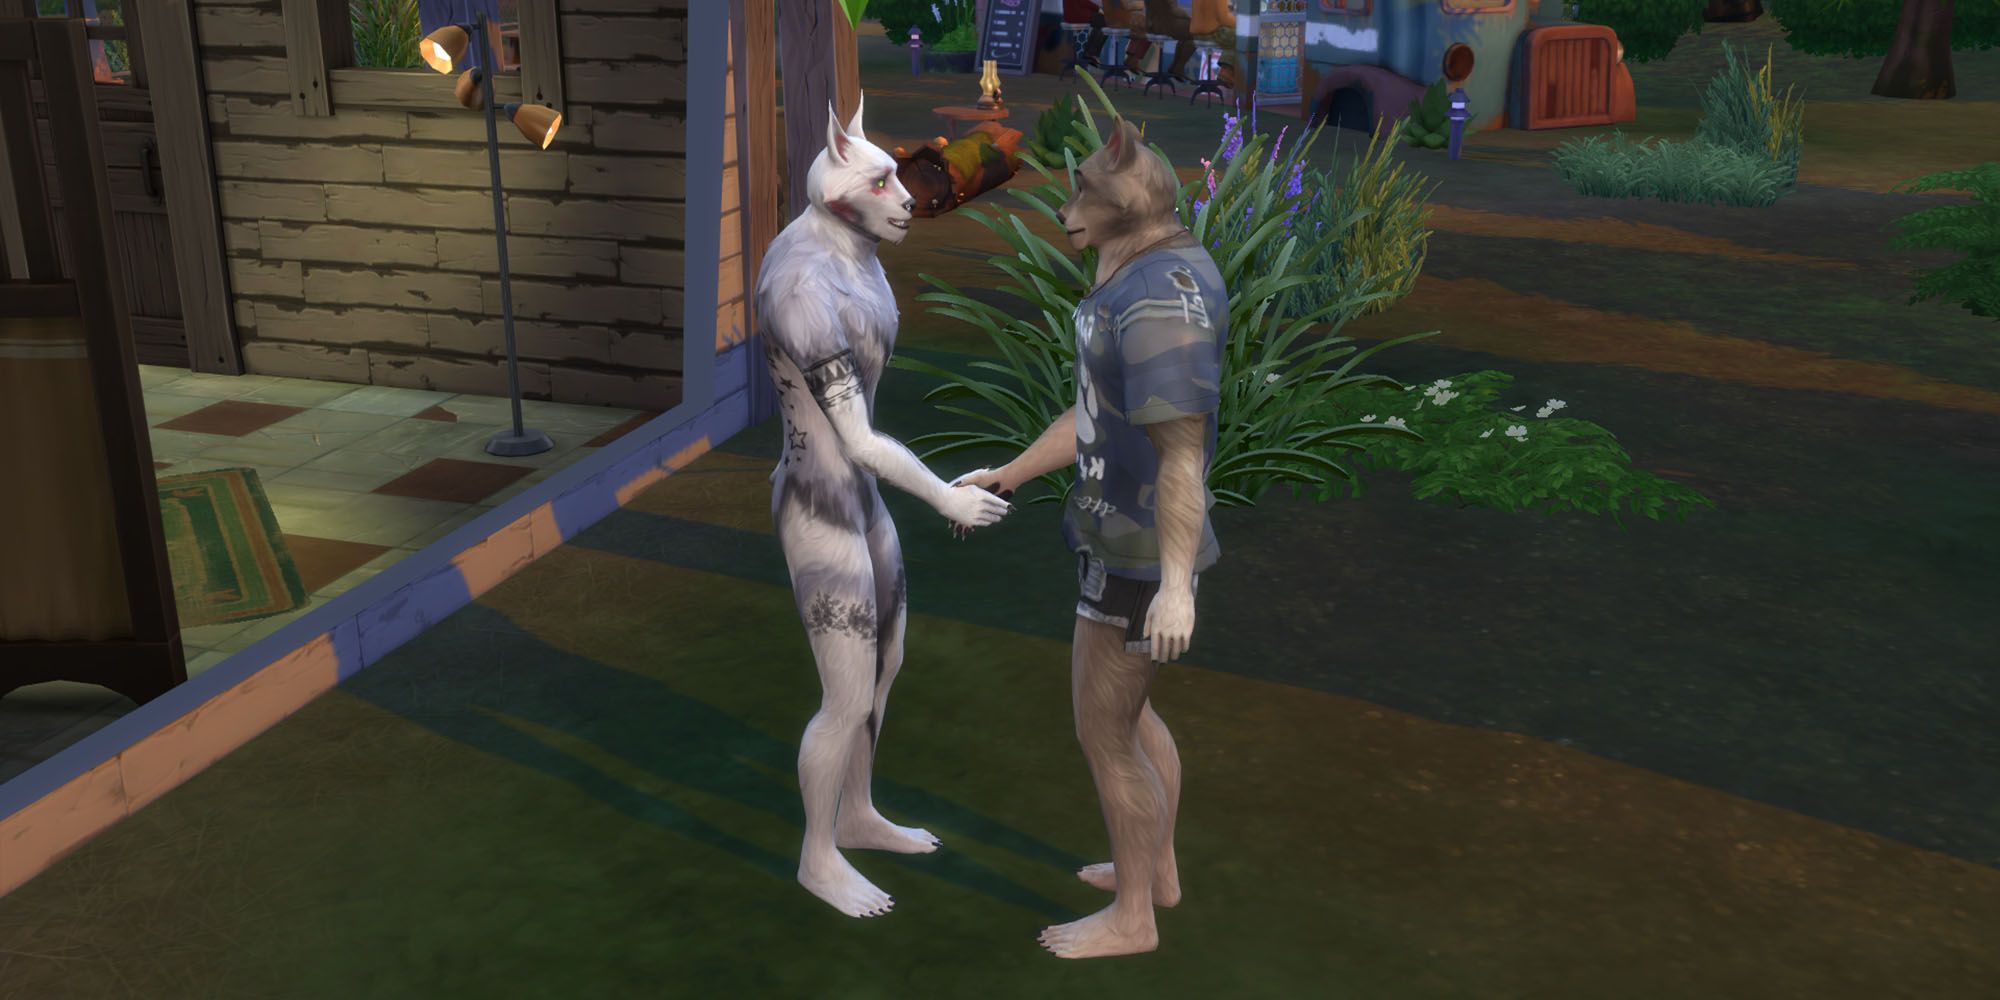 A Sims 4 werewolf joining the Wildfangs